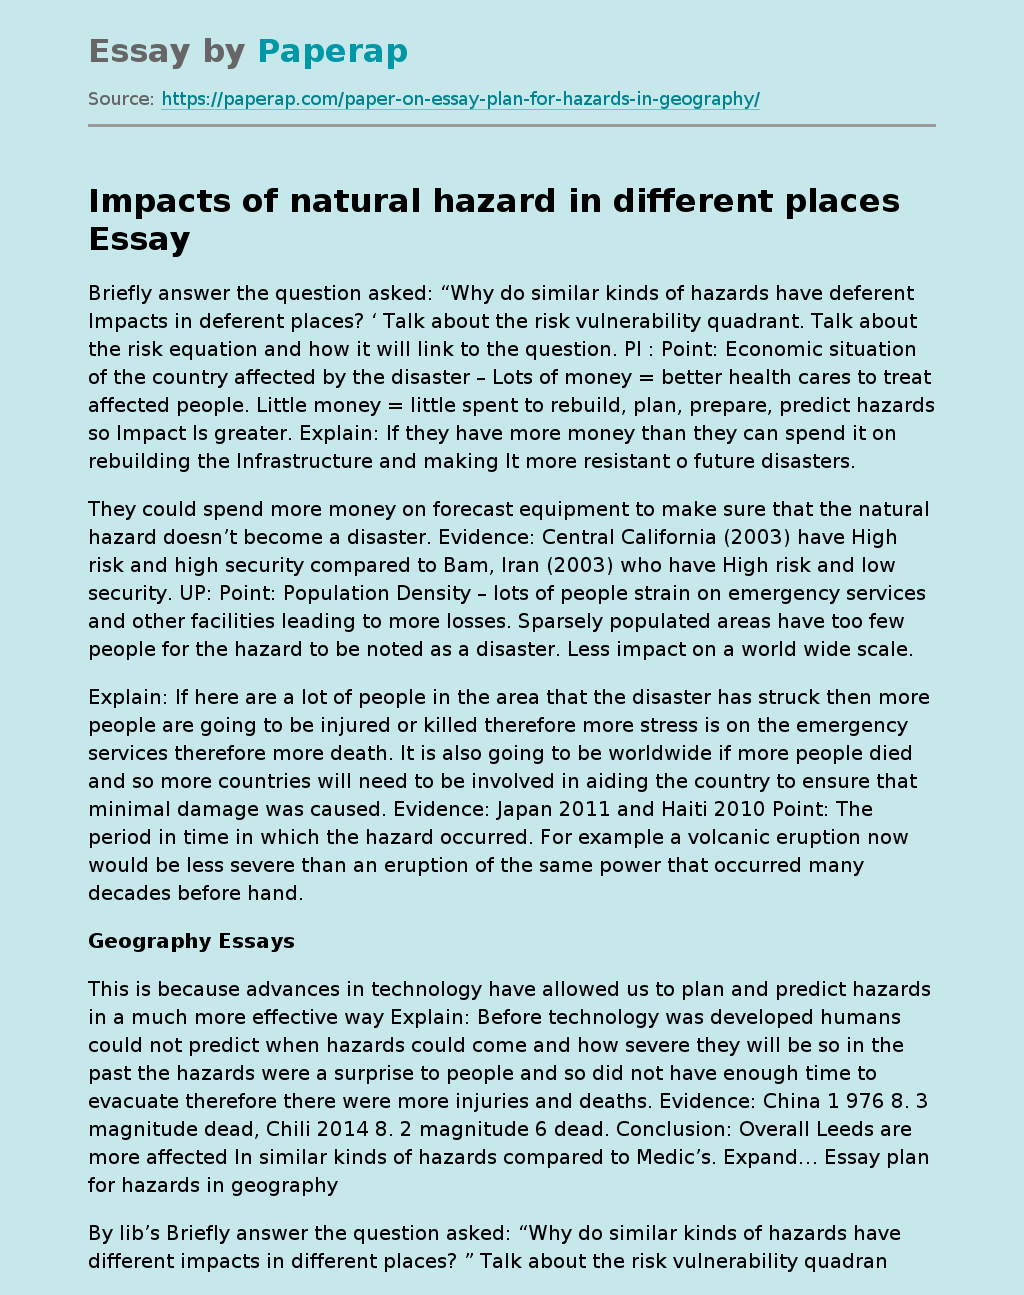 Impacts of natural hazard in different places